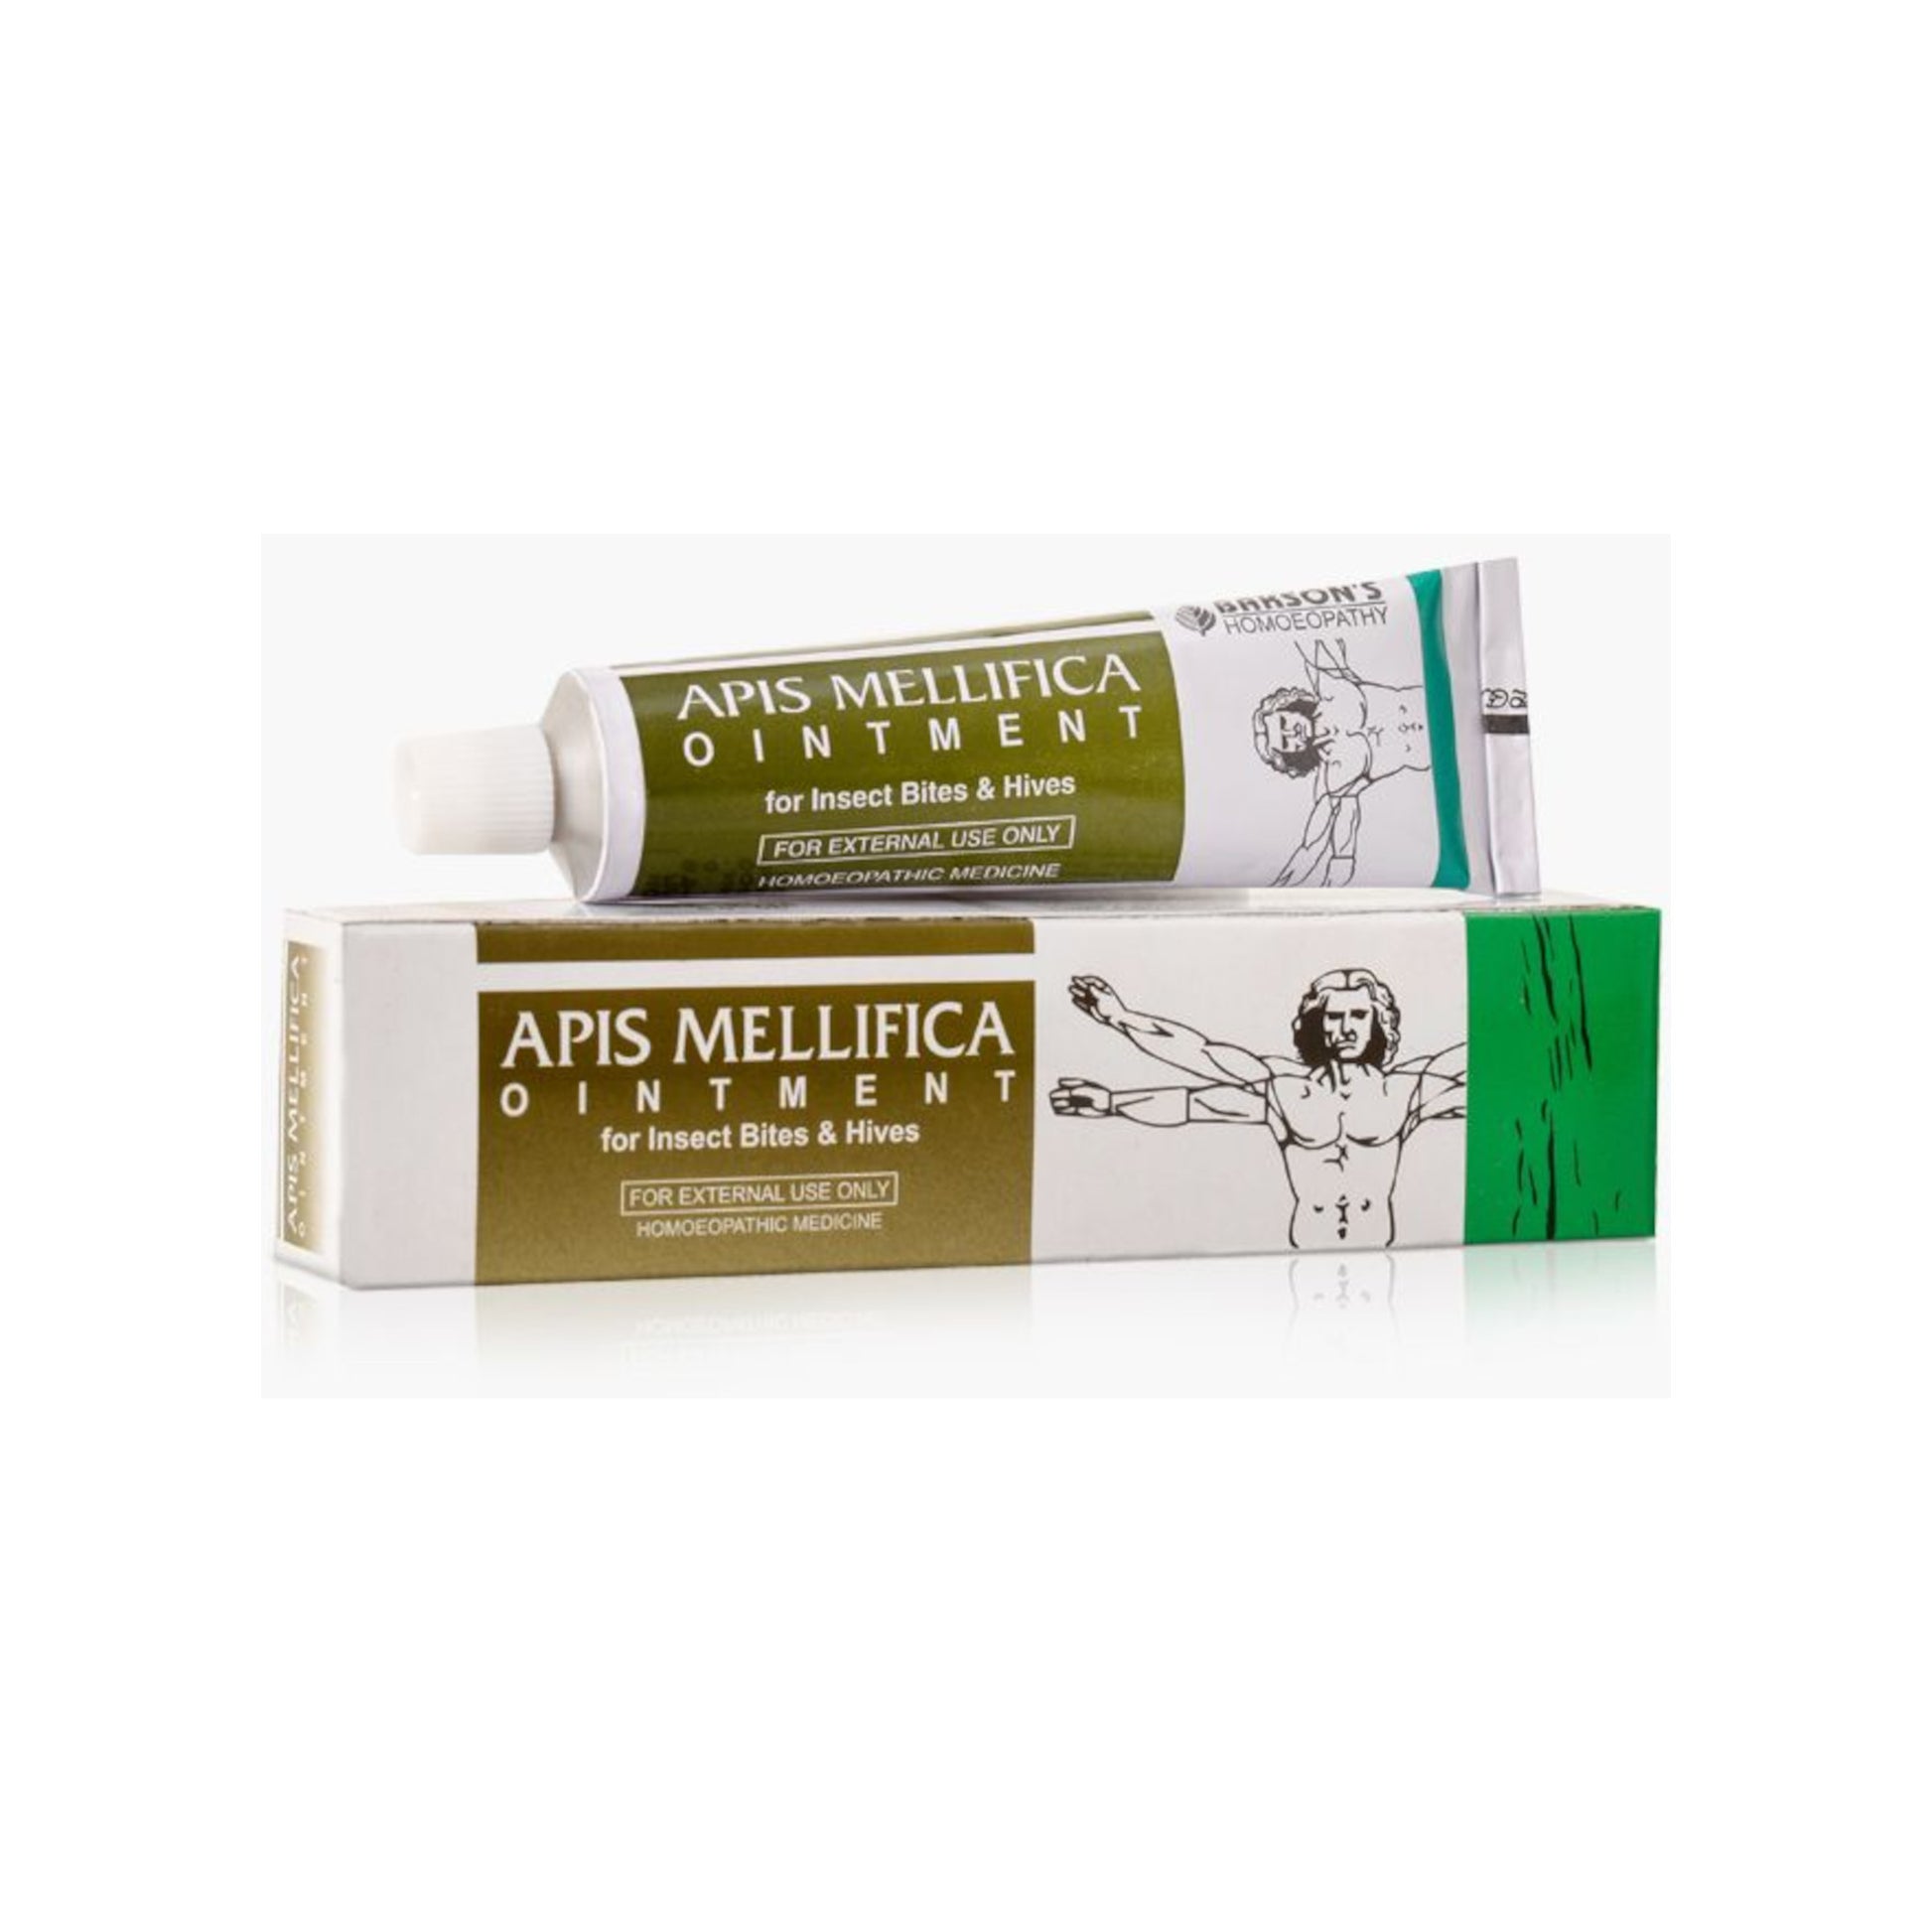 Image: Bakson's Apis Mellifica Ointment 25 g: Homeopathic remedy for skin irritations, redness, itching, and swelling. 